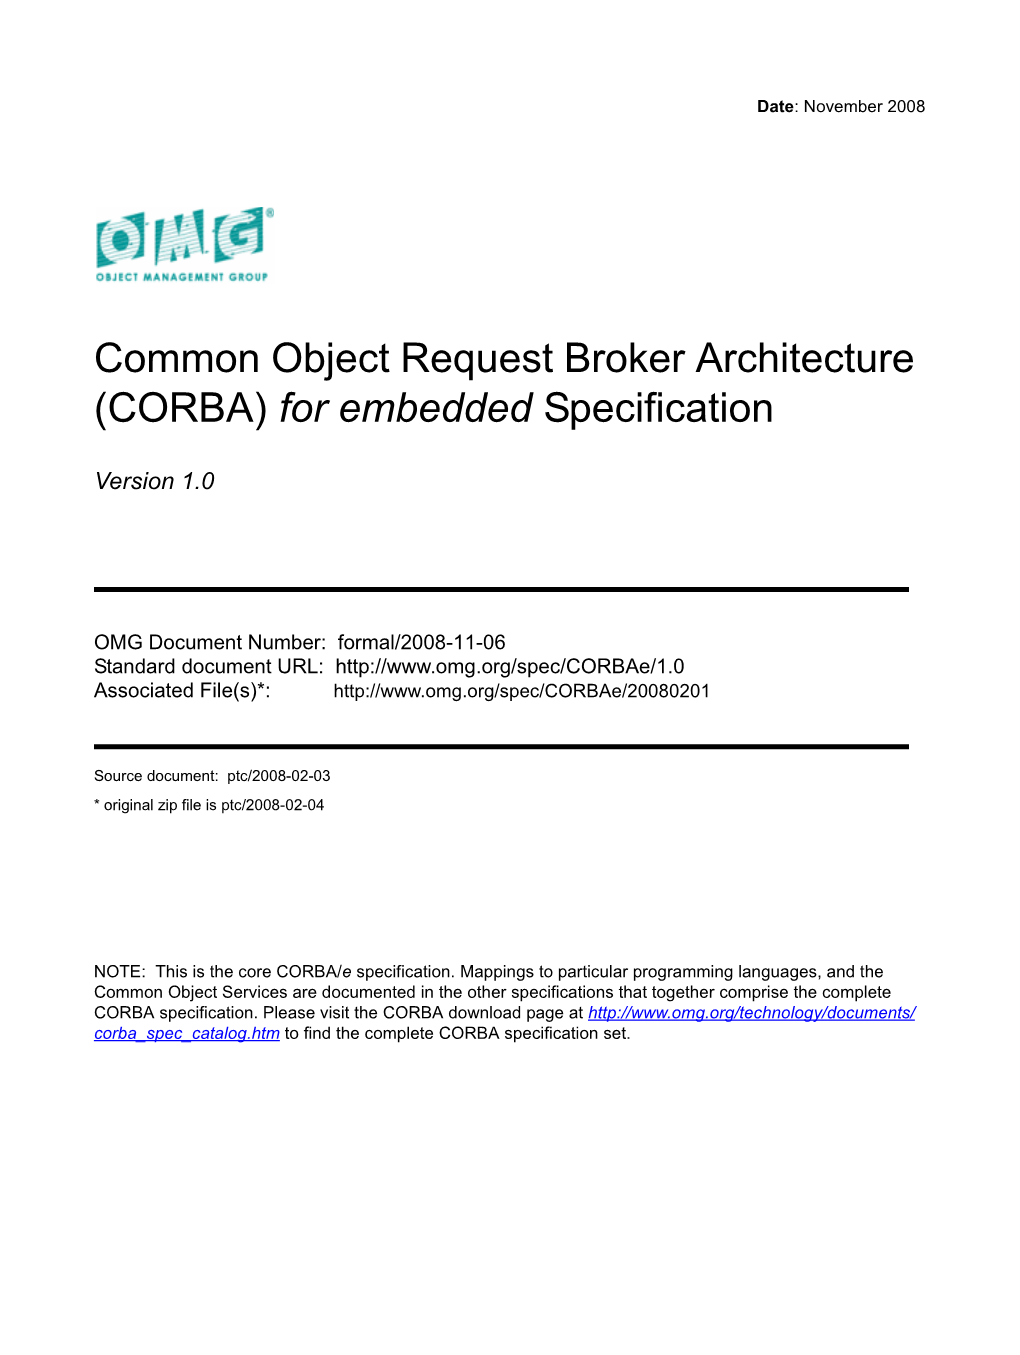 Common Object Request Broker Architecture (CORBA) for Embedded Specification